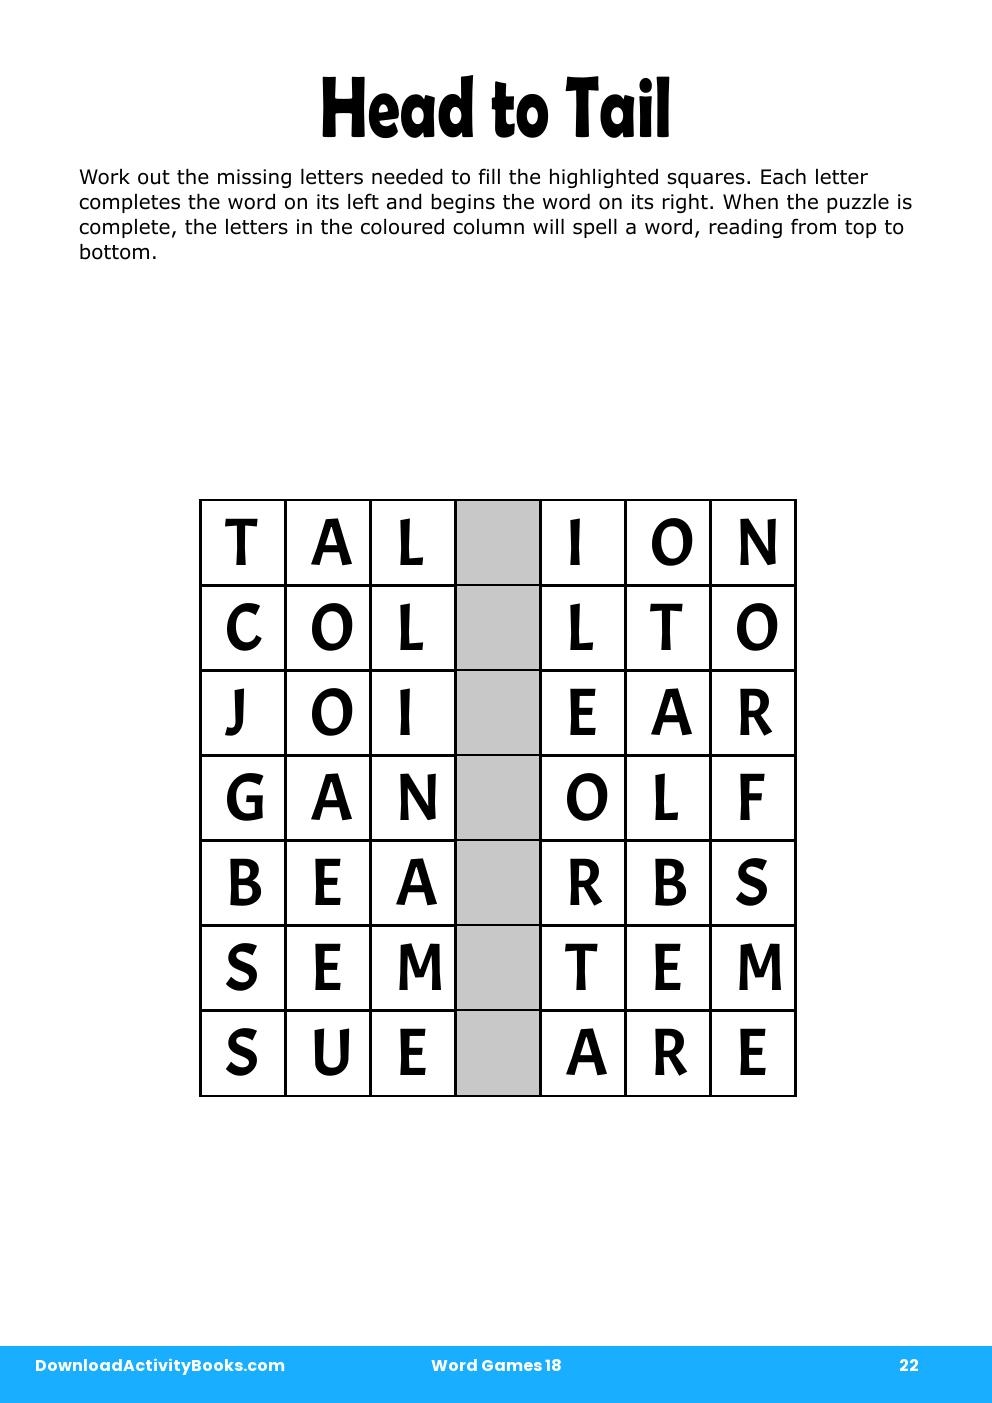 Head to Tail in Word Games 18